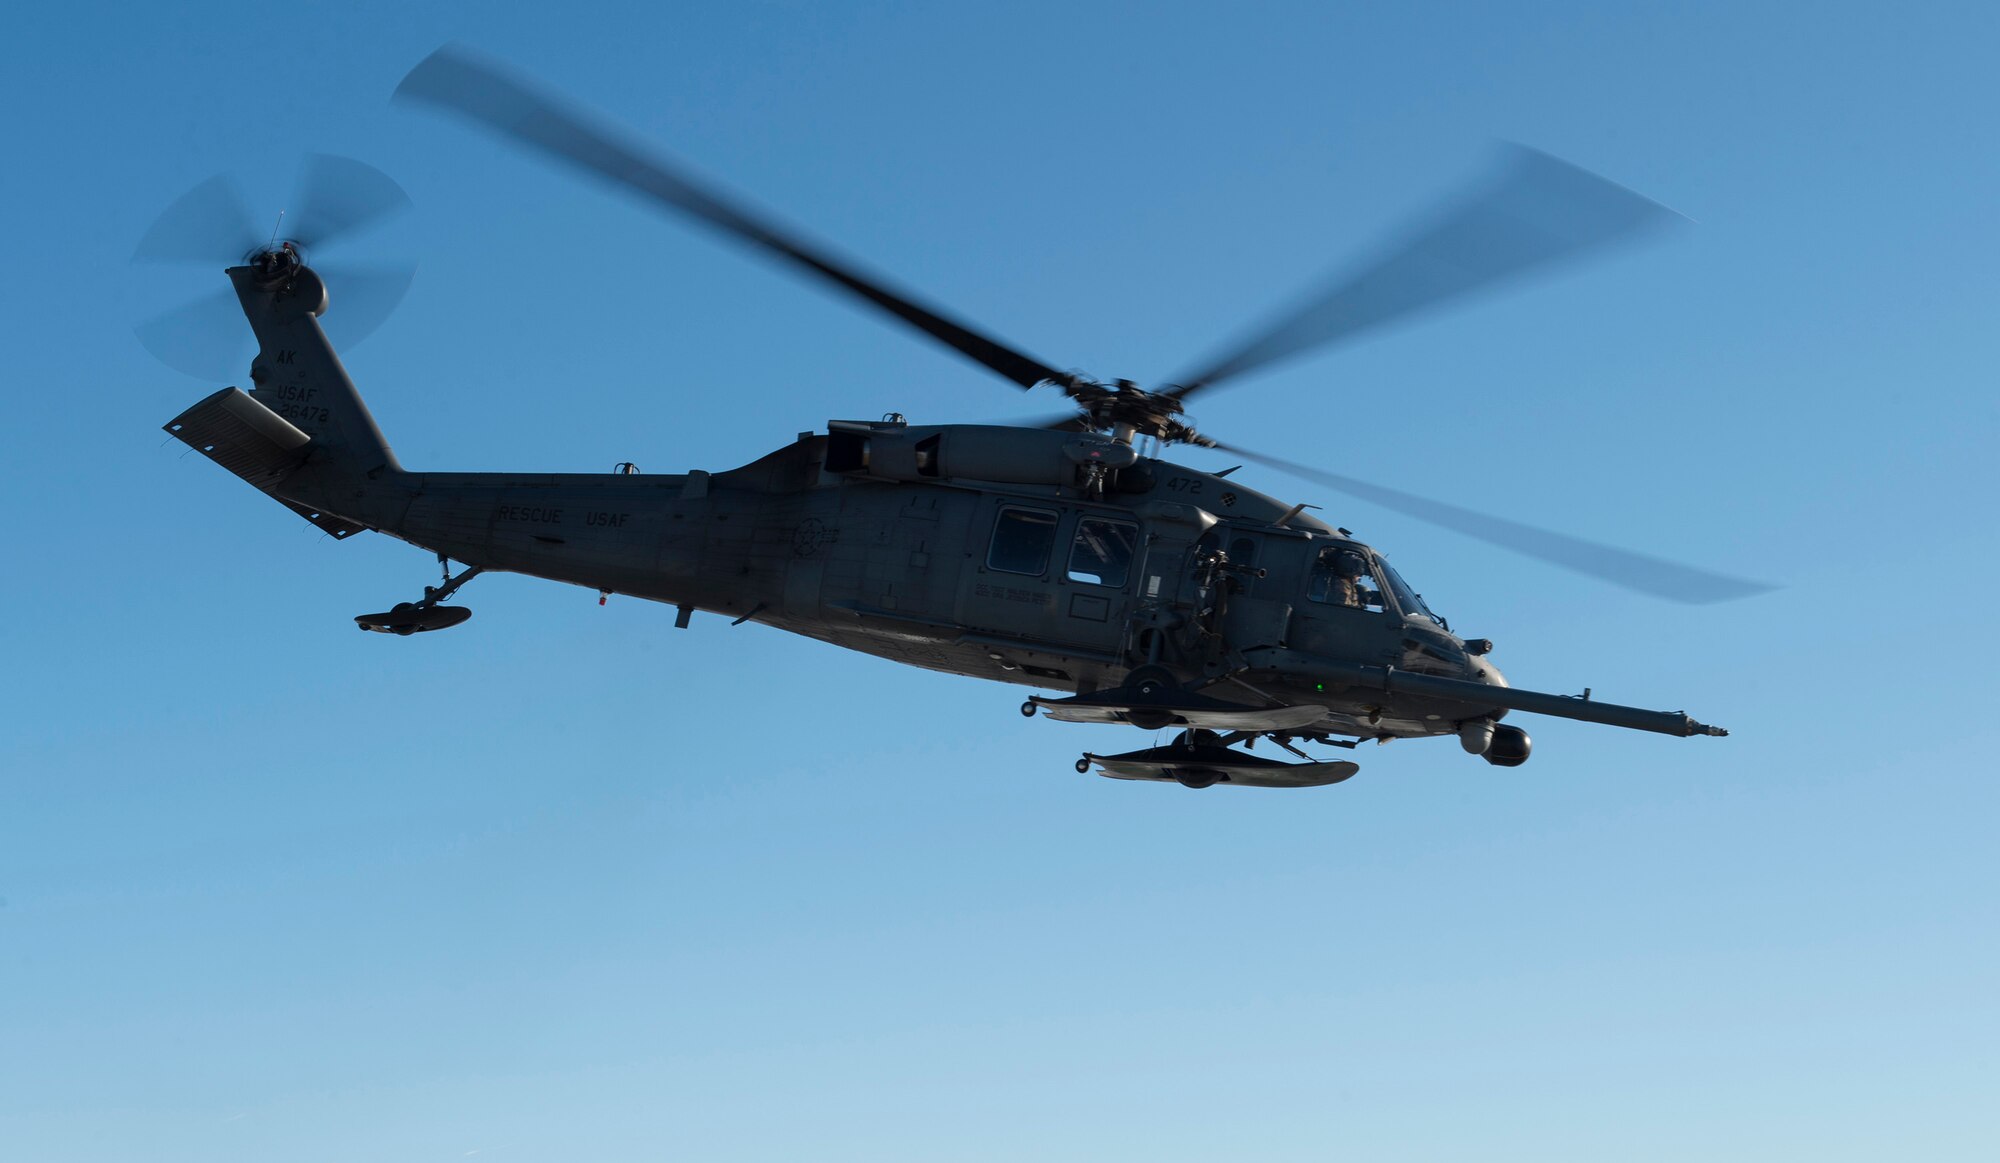 A HH-60G Pave Hawk helicopter operated by Alaska Air National Guardsmen with the 210th Rescue Squadron takes off for aerial live-fire gunnery training at Joint Base Elmendorf-Richardson, Alaska, March 19, 2019. Alaska Air National Guard HH-60G Pave Hawk helicopter special missions aviators honed their aerial gunnery skills by conducting live-fire training with the GAU-2 7.62 mm minigun. (U.S. Air Force photo by Alejandro Peña)